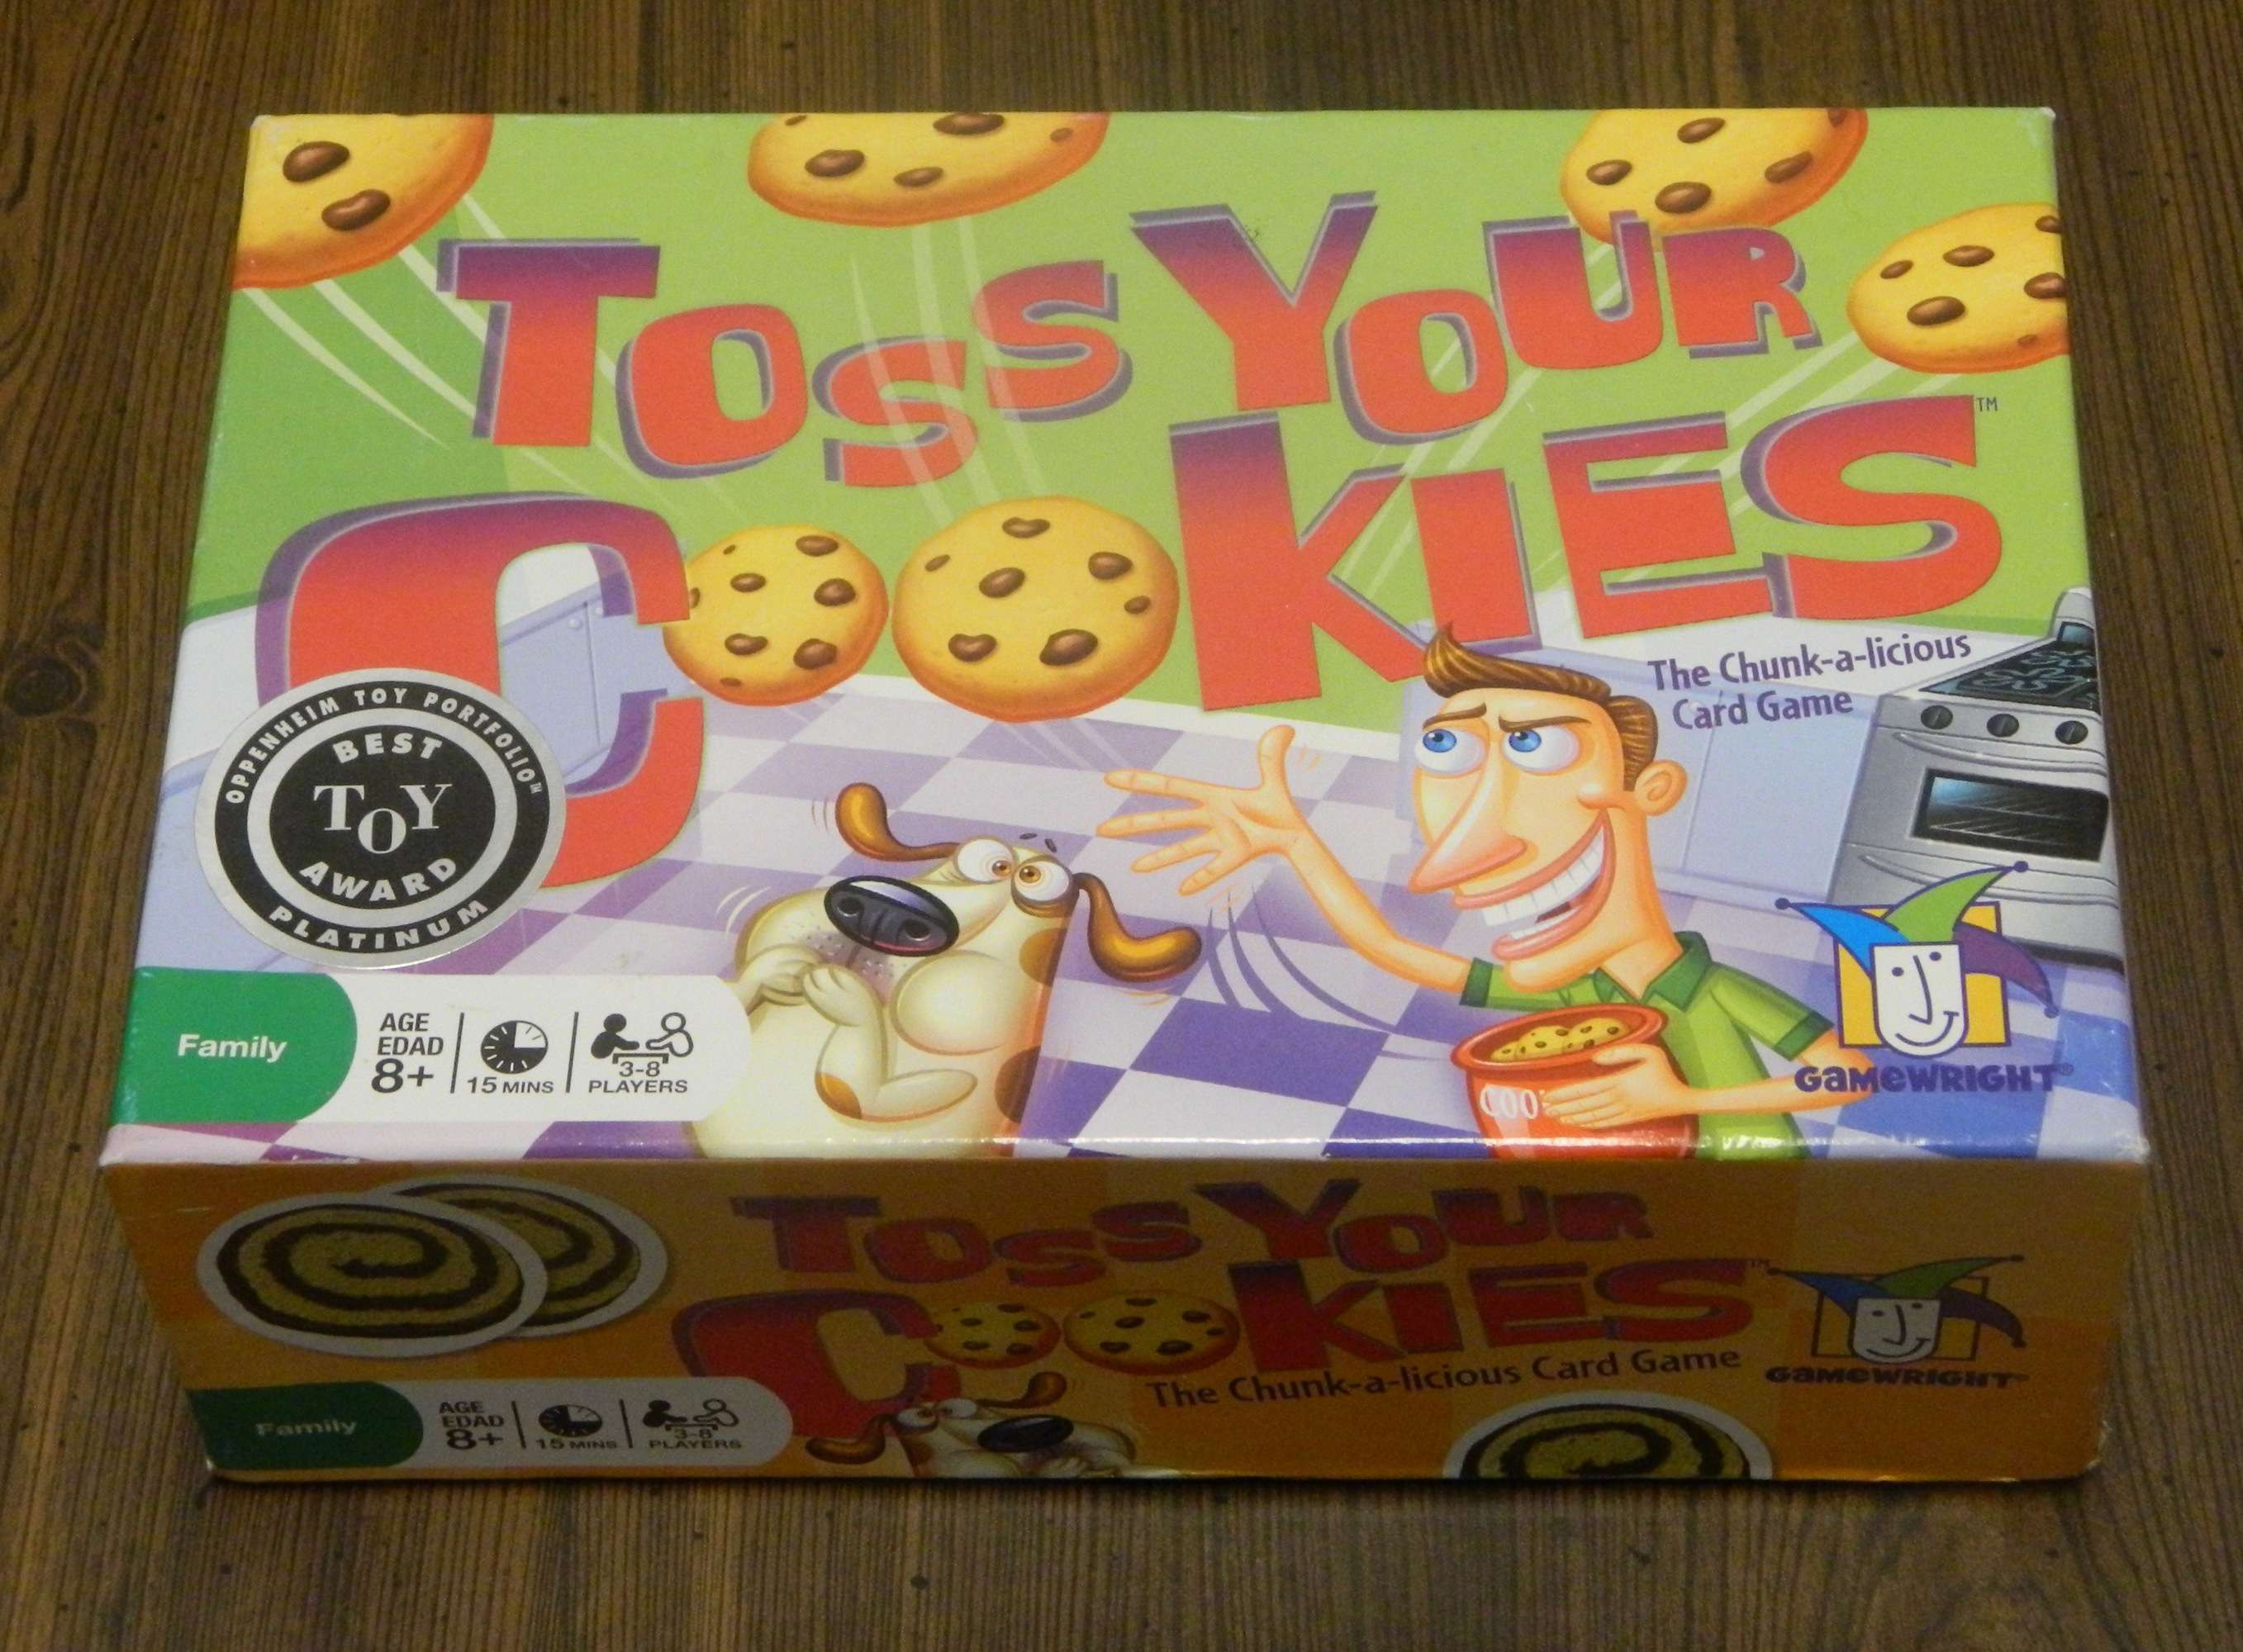 Toss Your Cookies Card Game Box